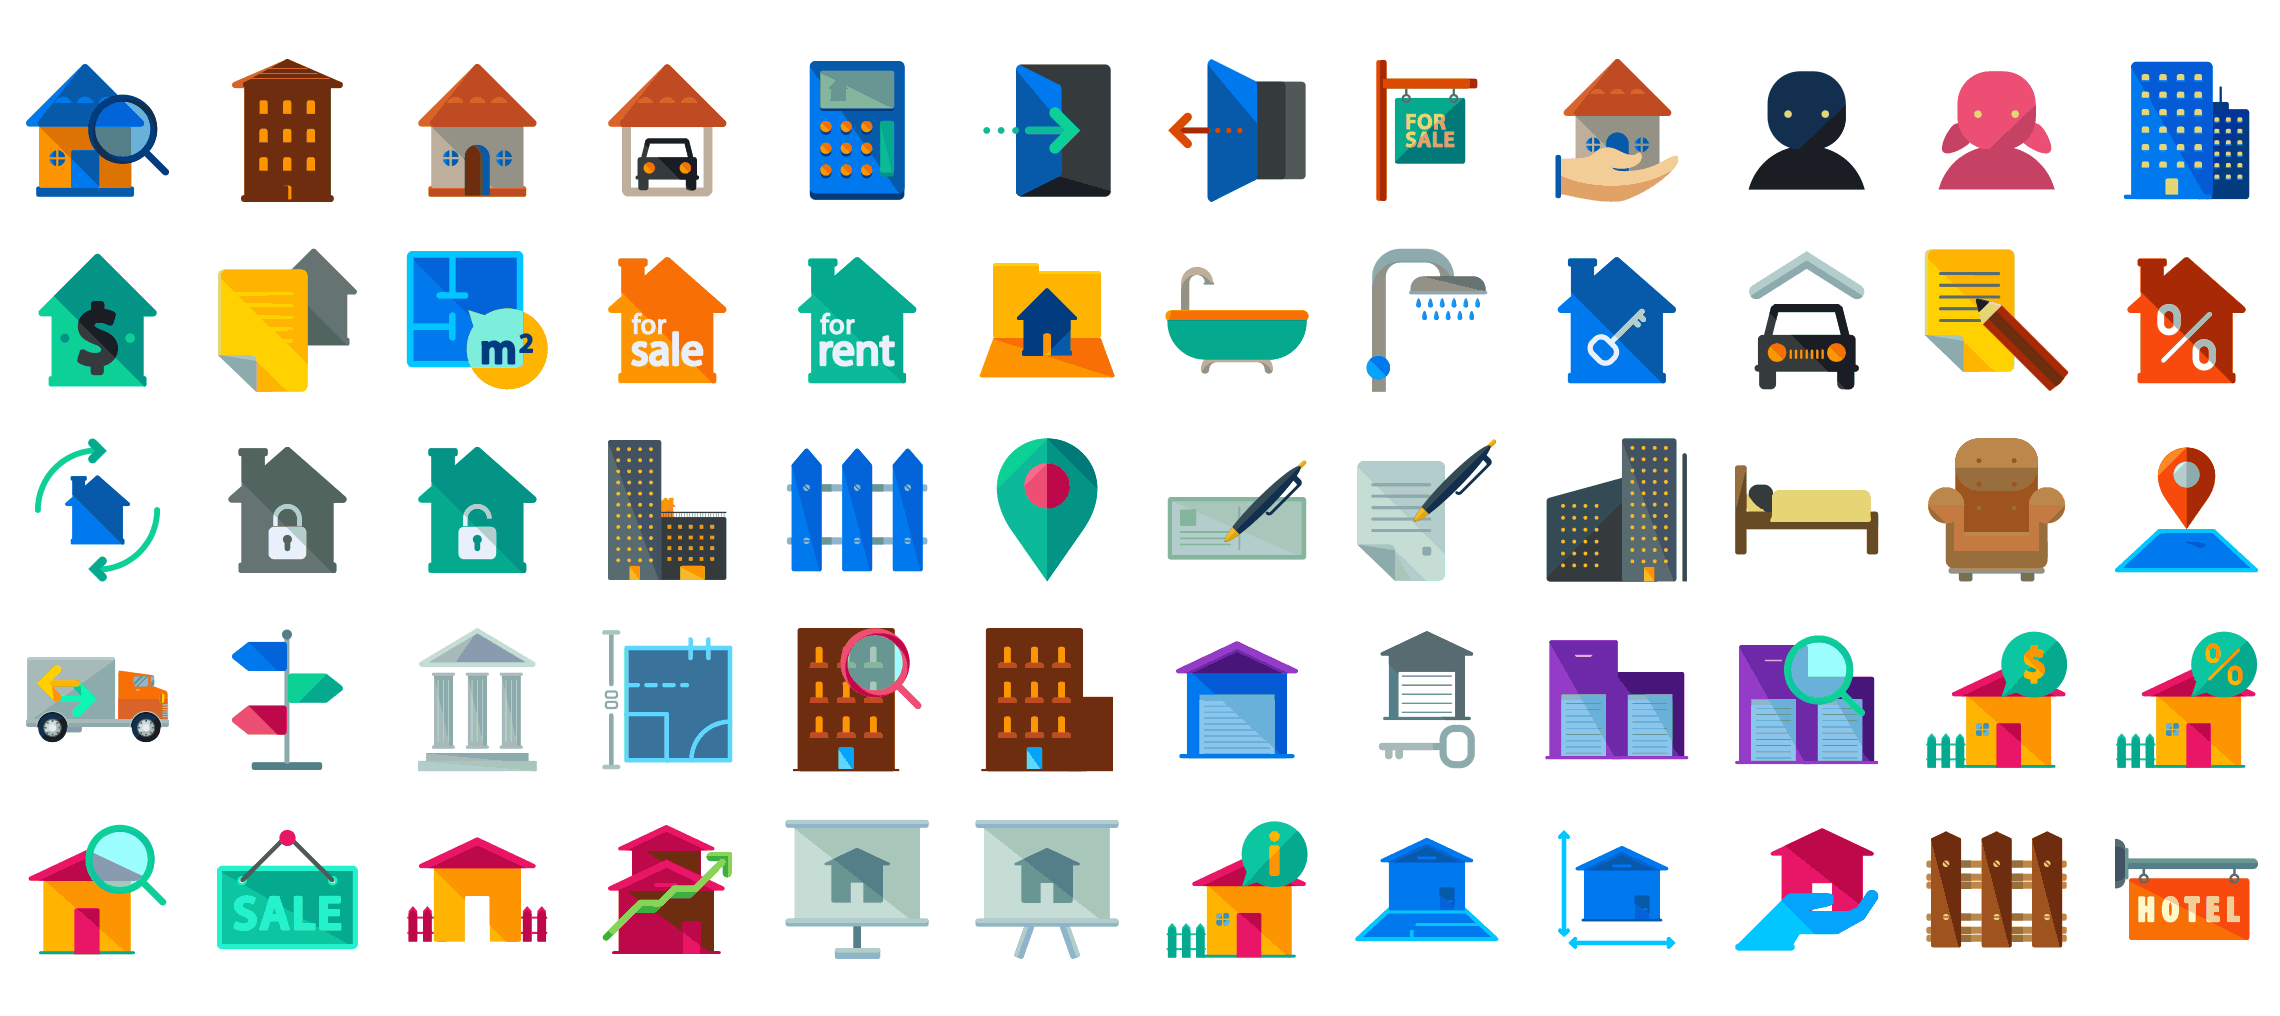 Real-Estate-flat-icons-1